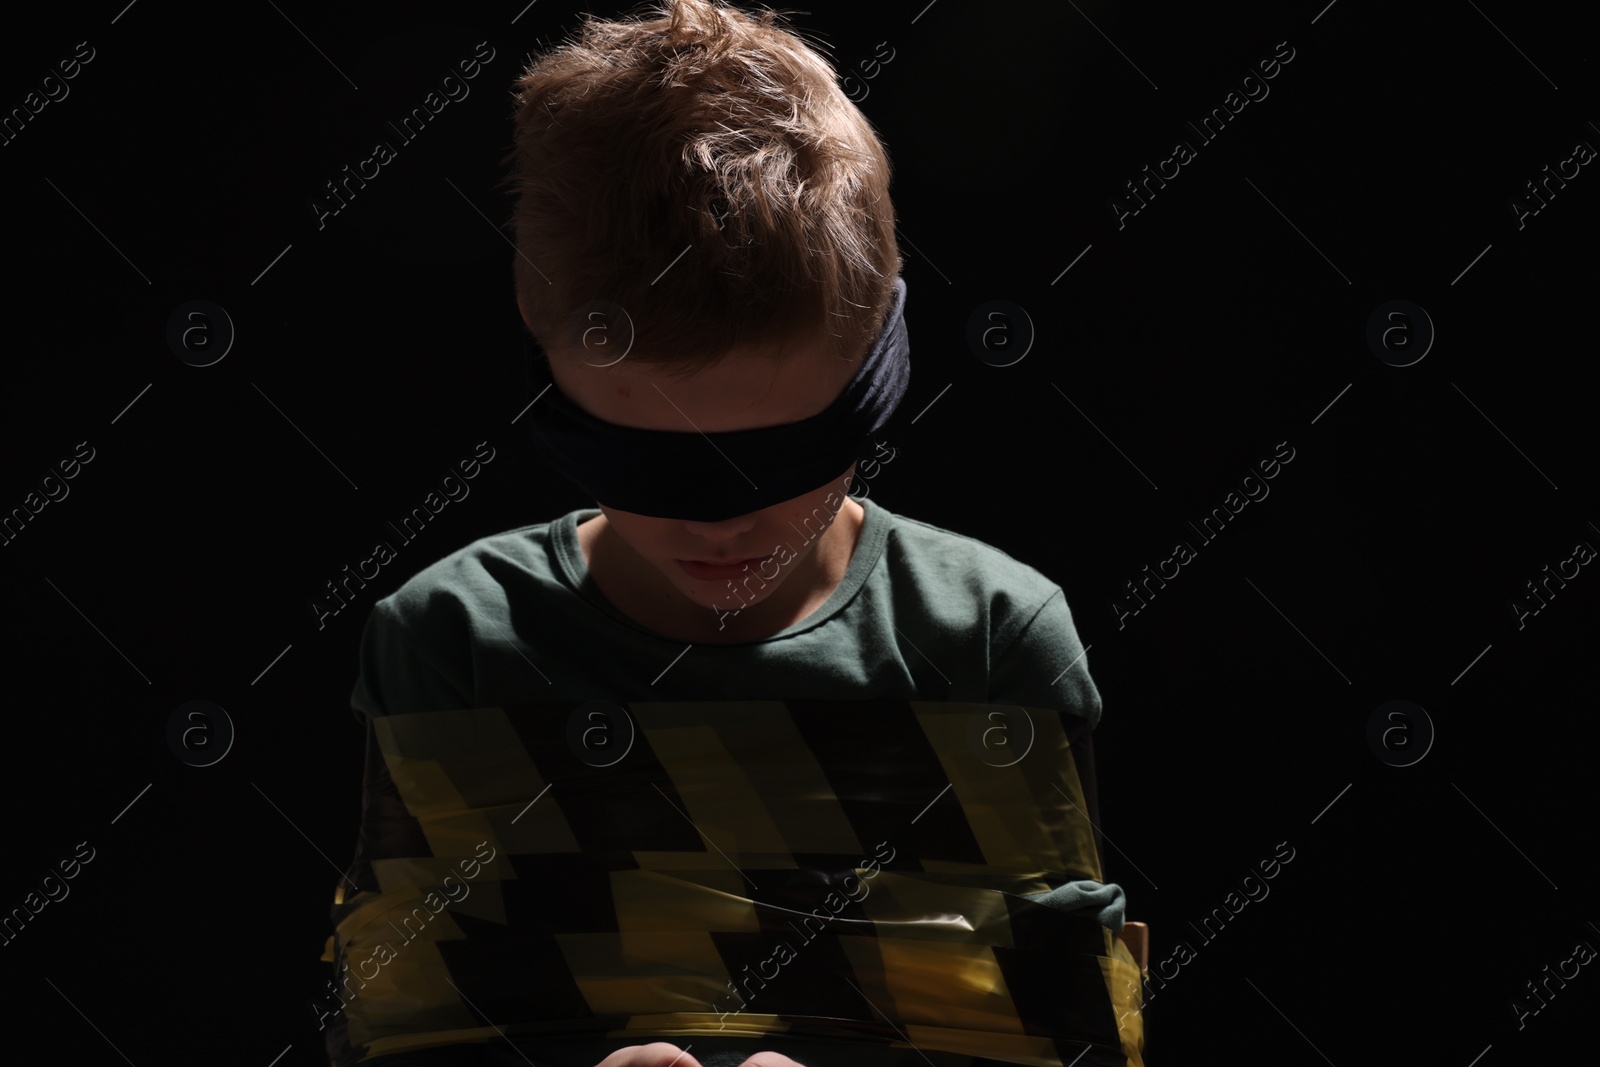 Photo of Blindfolded little boy tied up and taken hostage against dark background